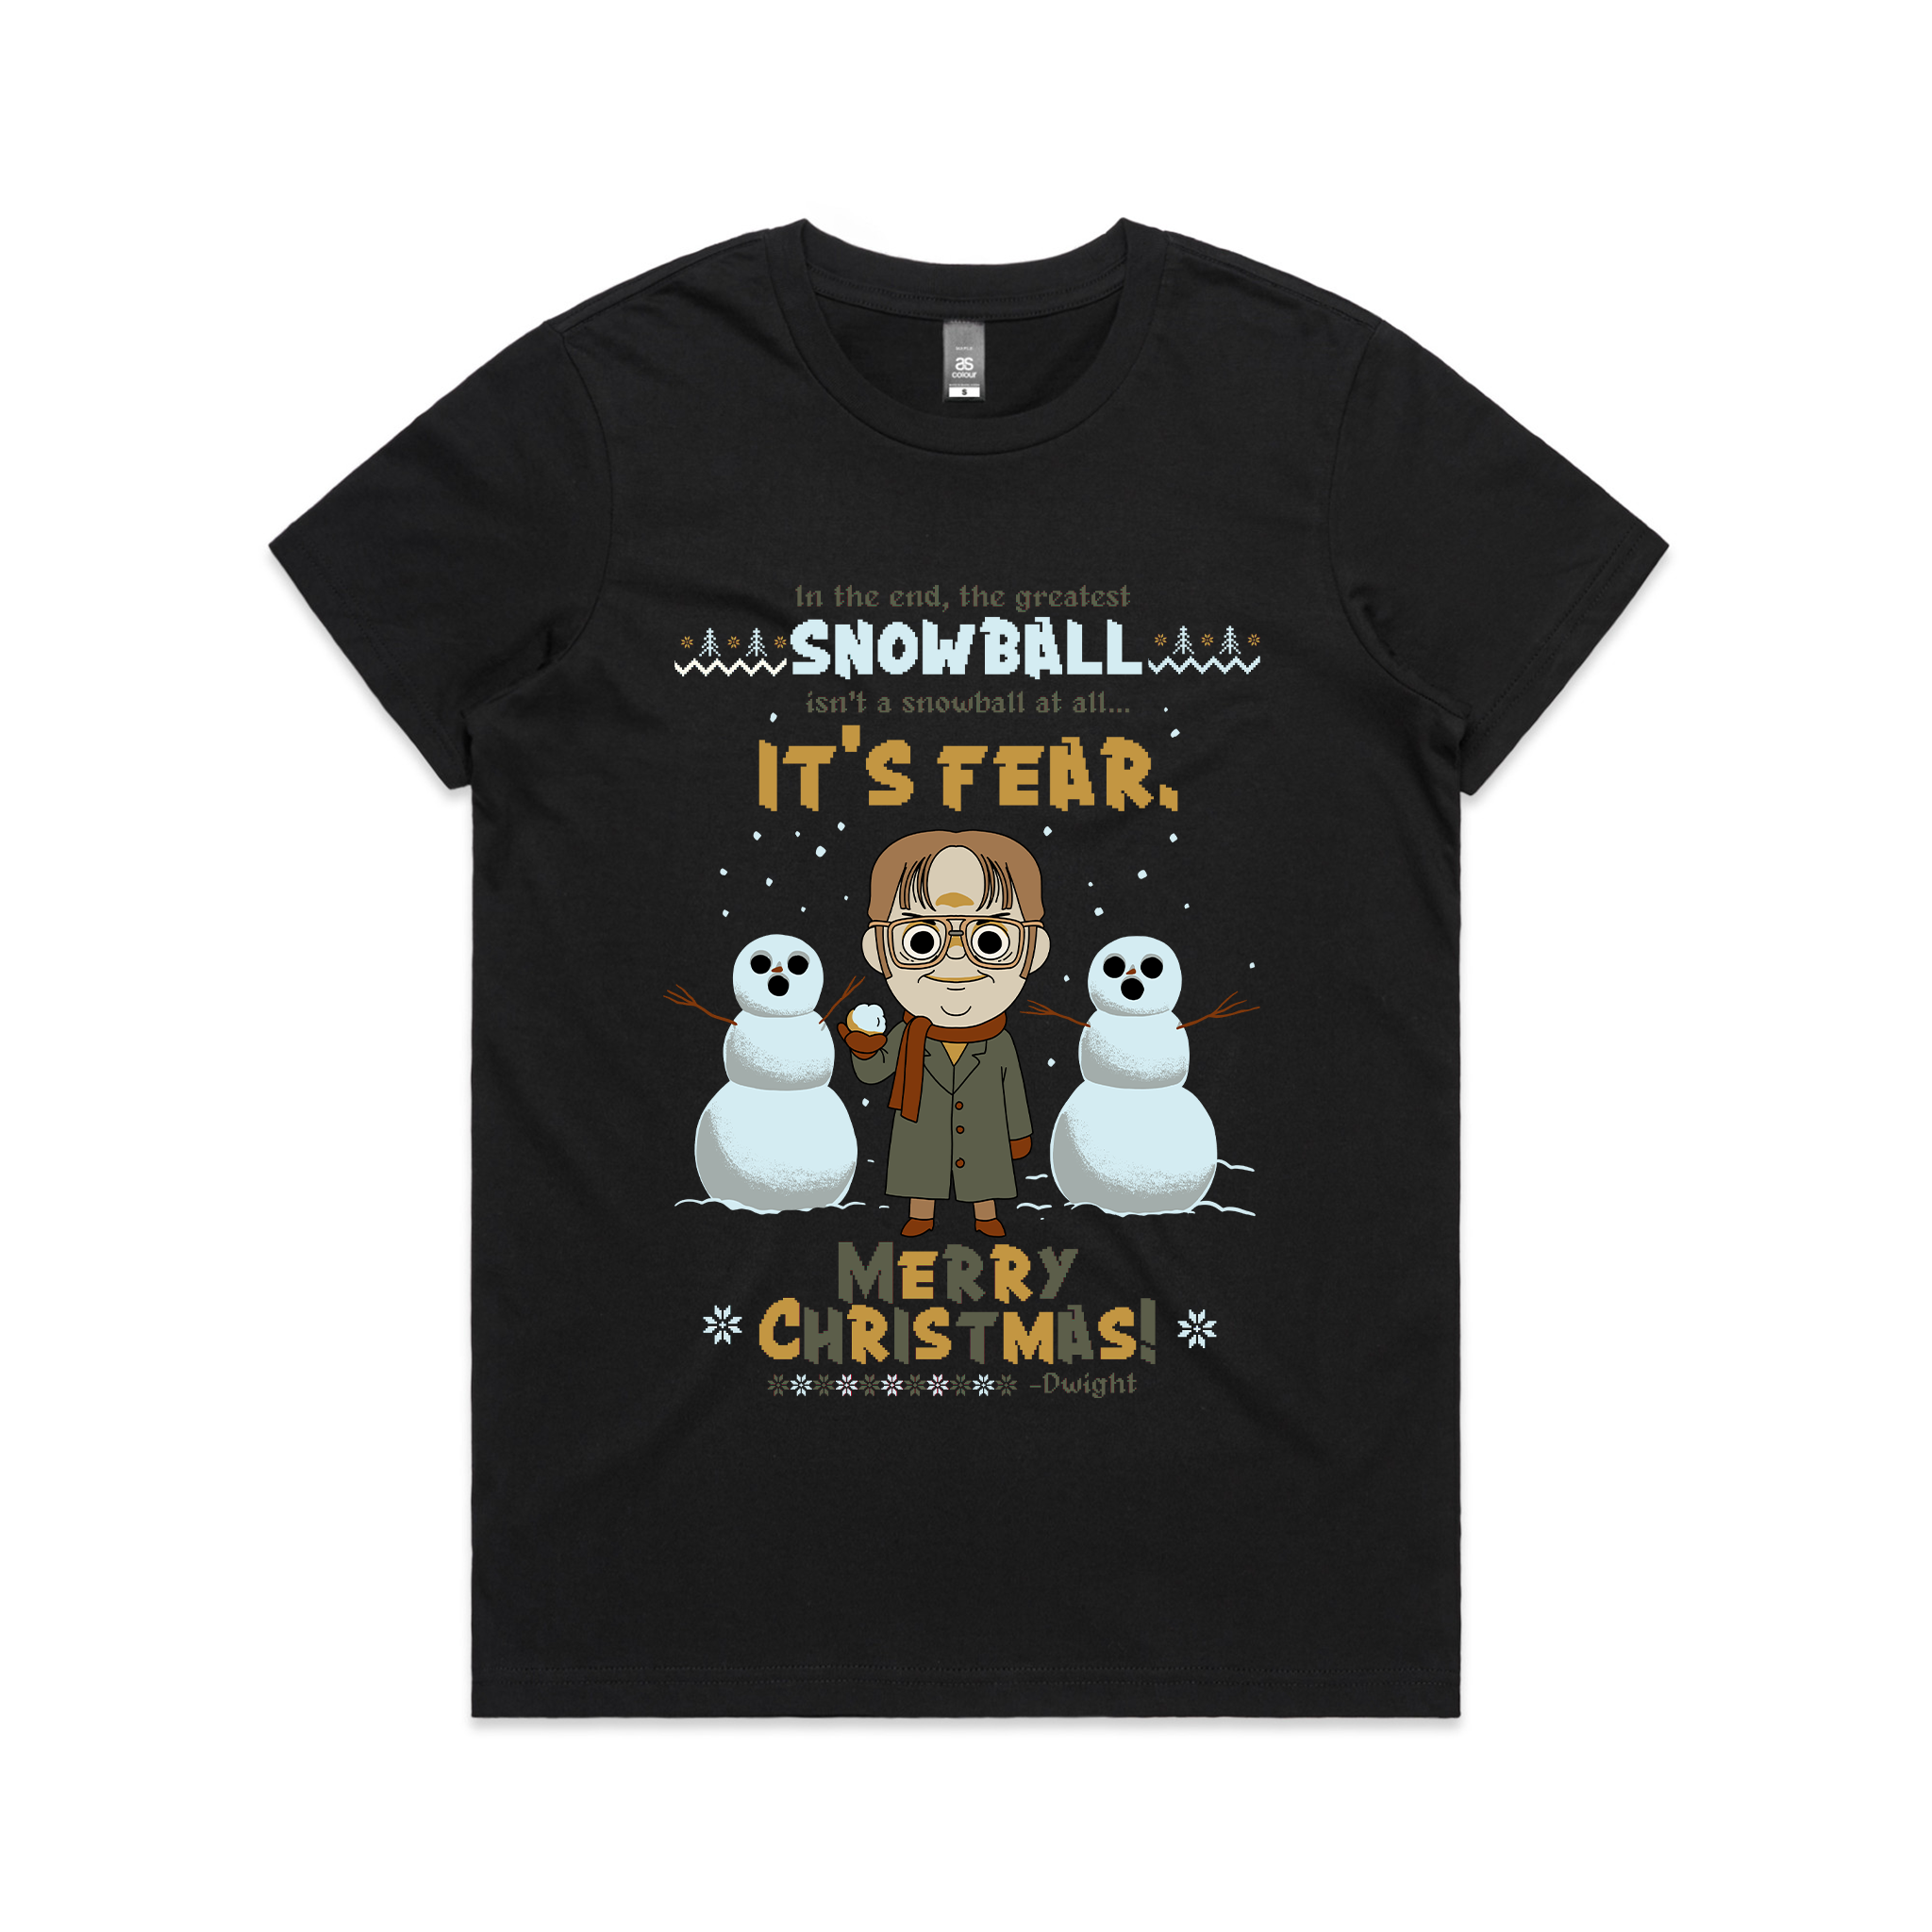 The Greatest Snowball Is Fear Tee